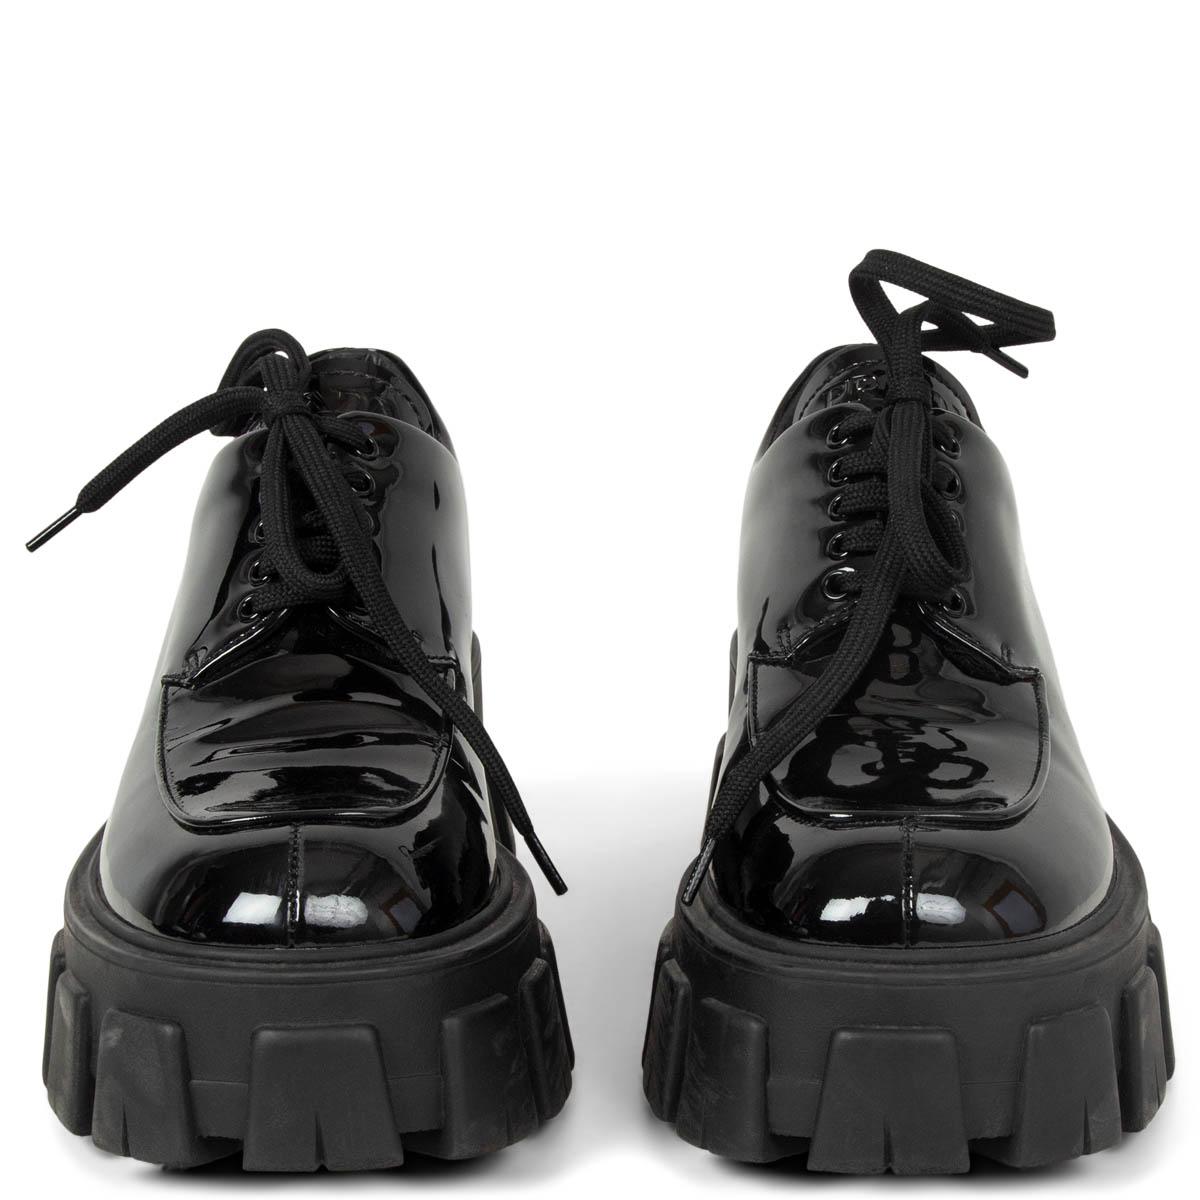 100% authentic Prada 2019 Monolith lace-up derby shoes in black patent leather. They're set on exaggerated chunky soles that feature embossed branding at the back. Have been worn once or twice and are in excellent condition. Come with dust bag.